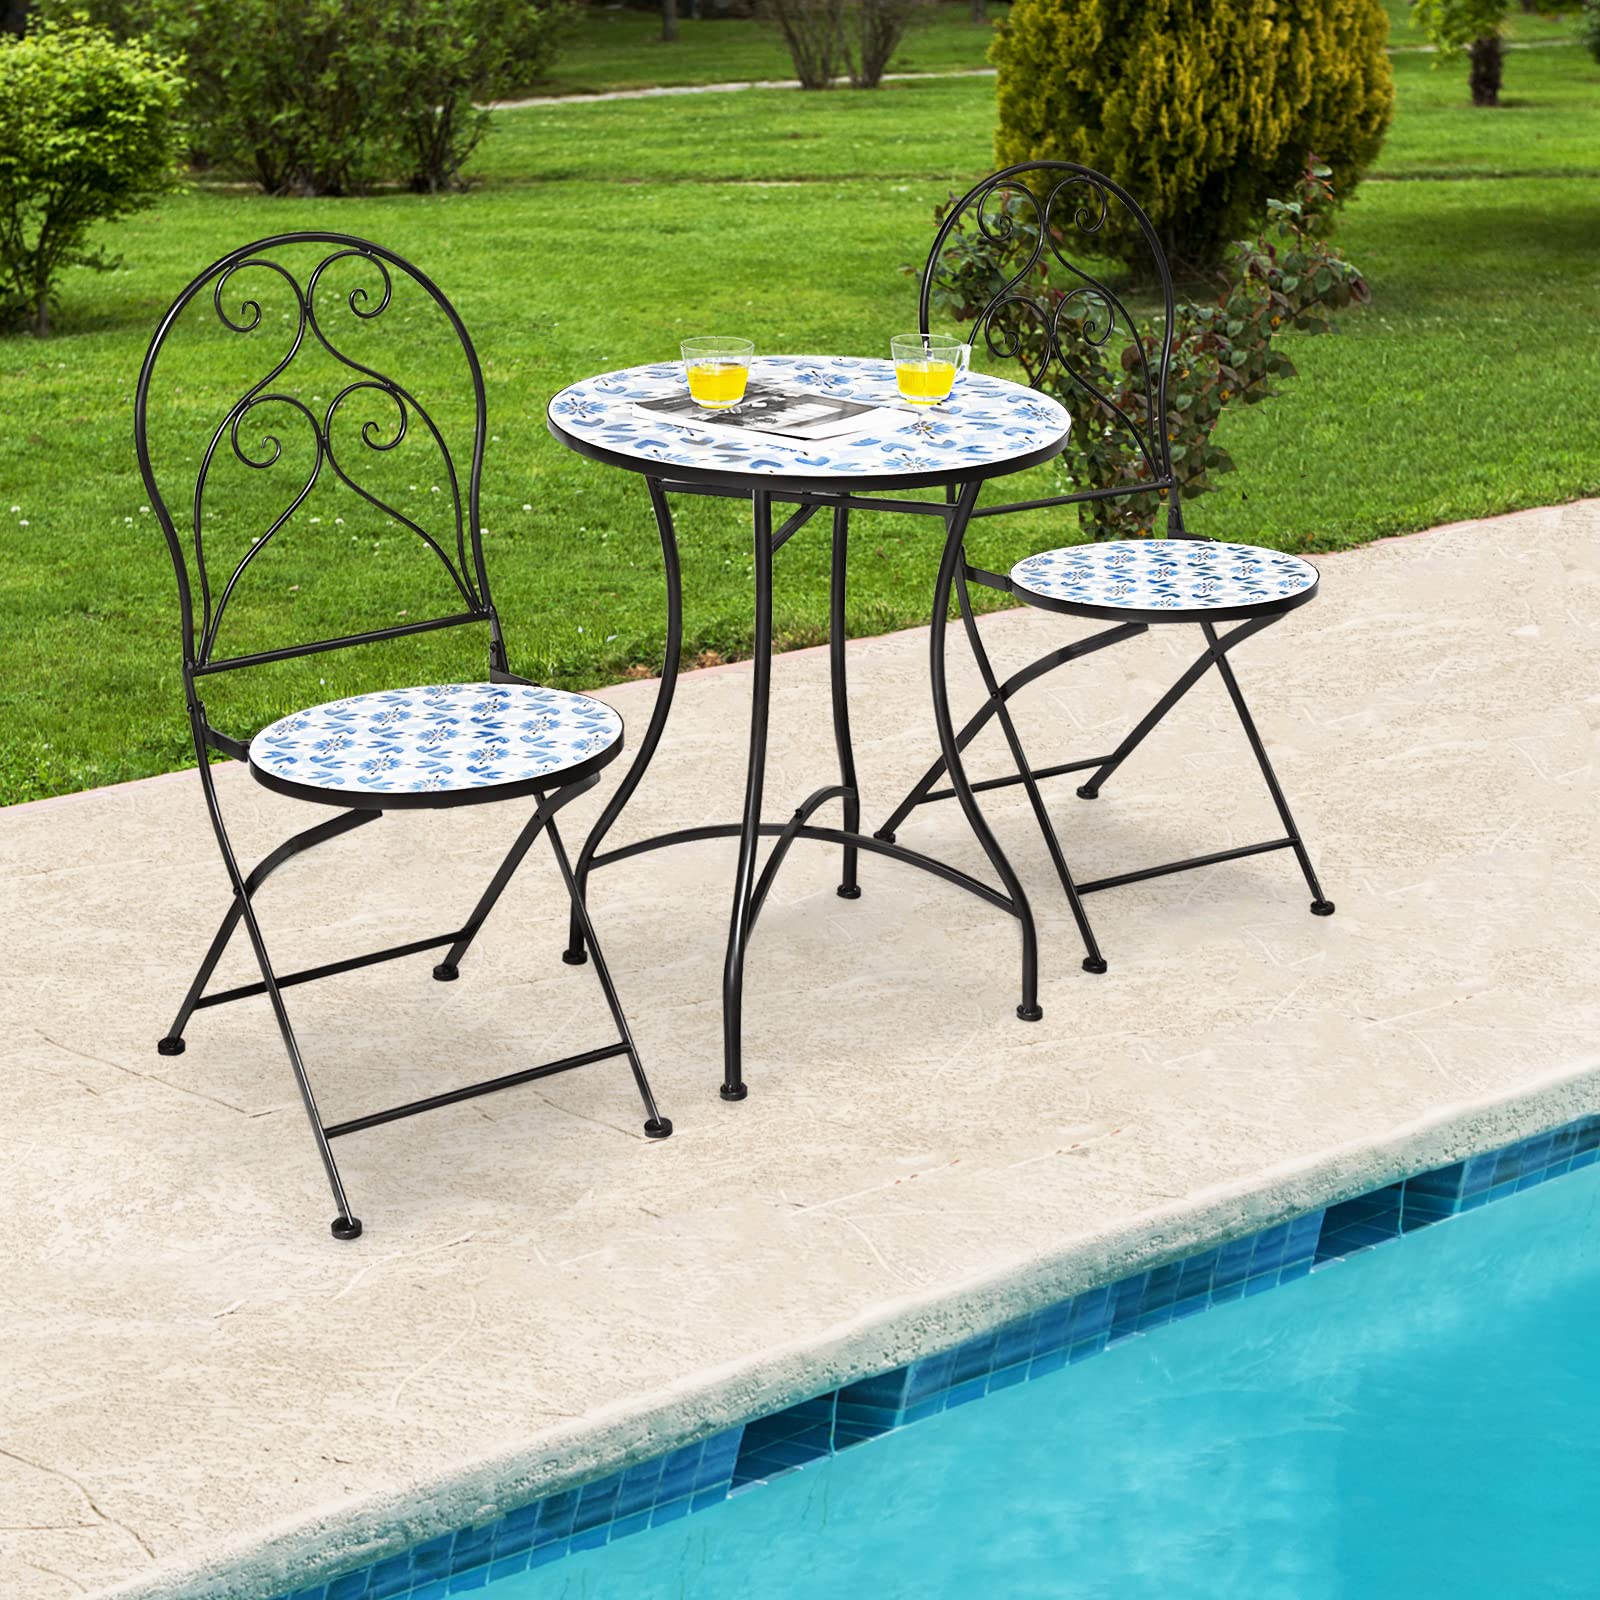 Giantex 2 Pieces Folding Bistro Chairs, Mosaic Patio Chairs with Ceramic Tiles Seat and Exquisite Floral Pattern